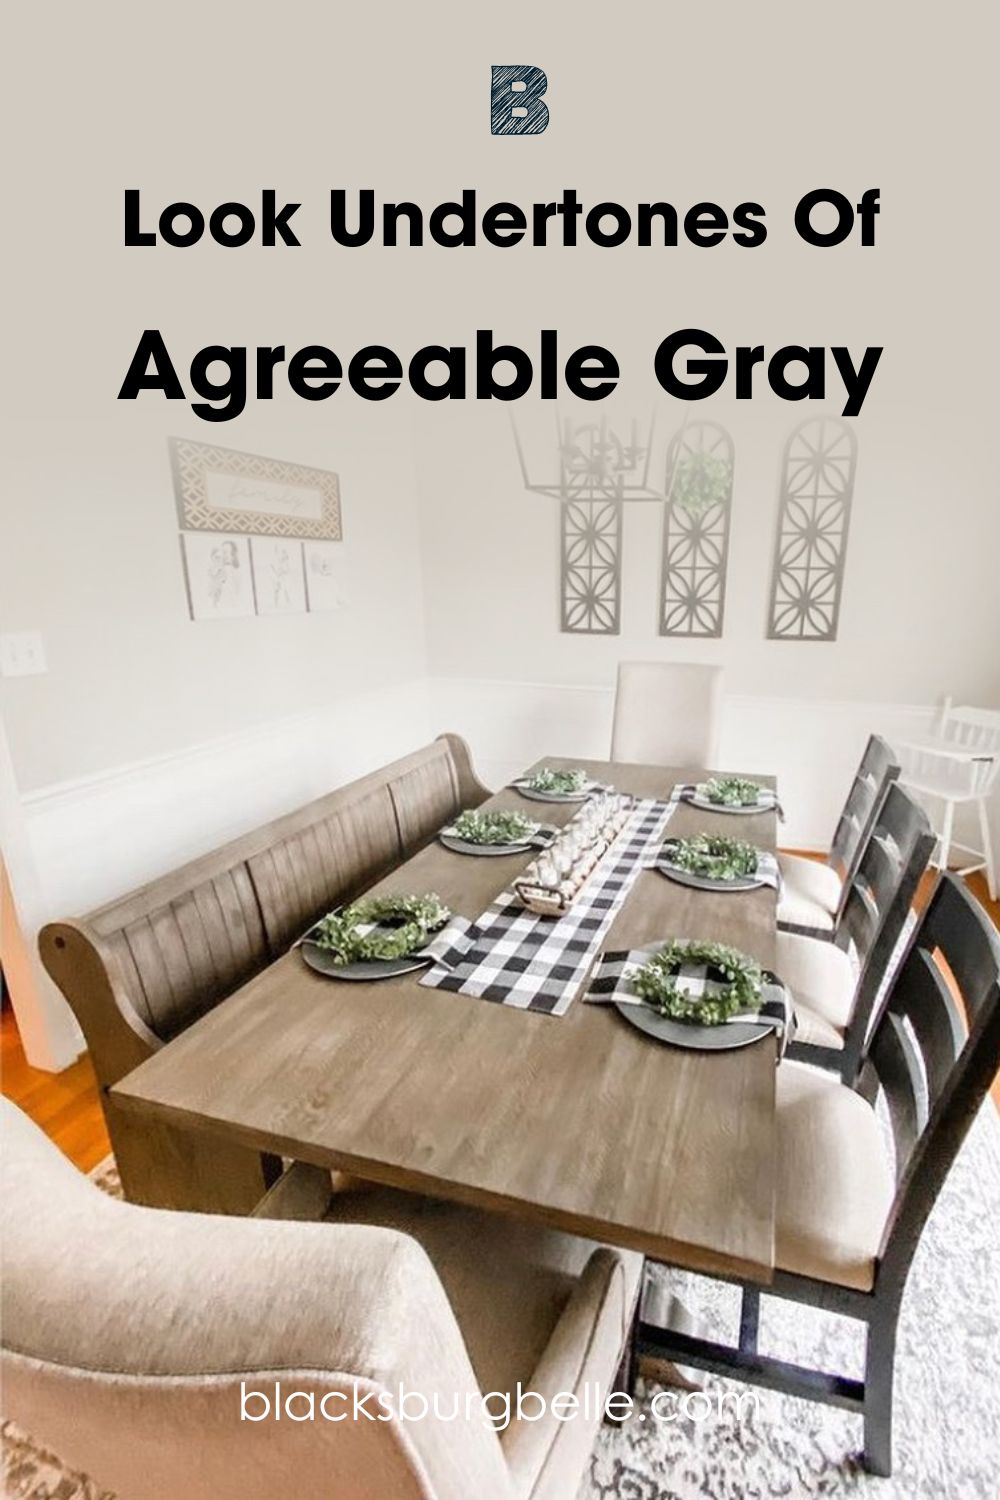 A Closer Look at Agreeable Gray’s Undertones